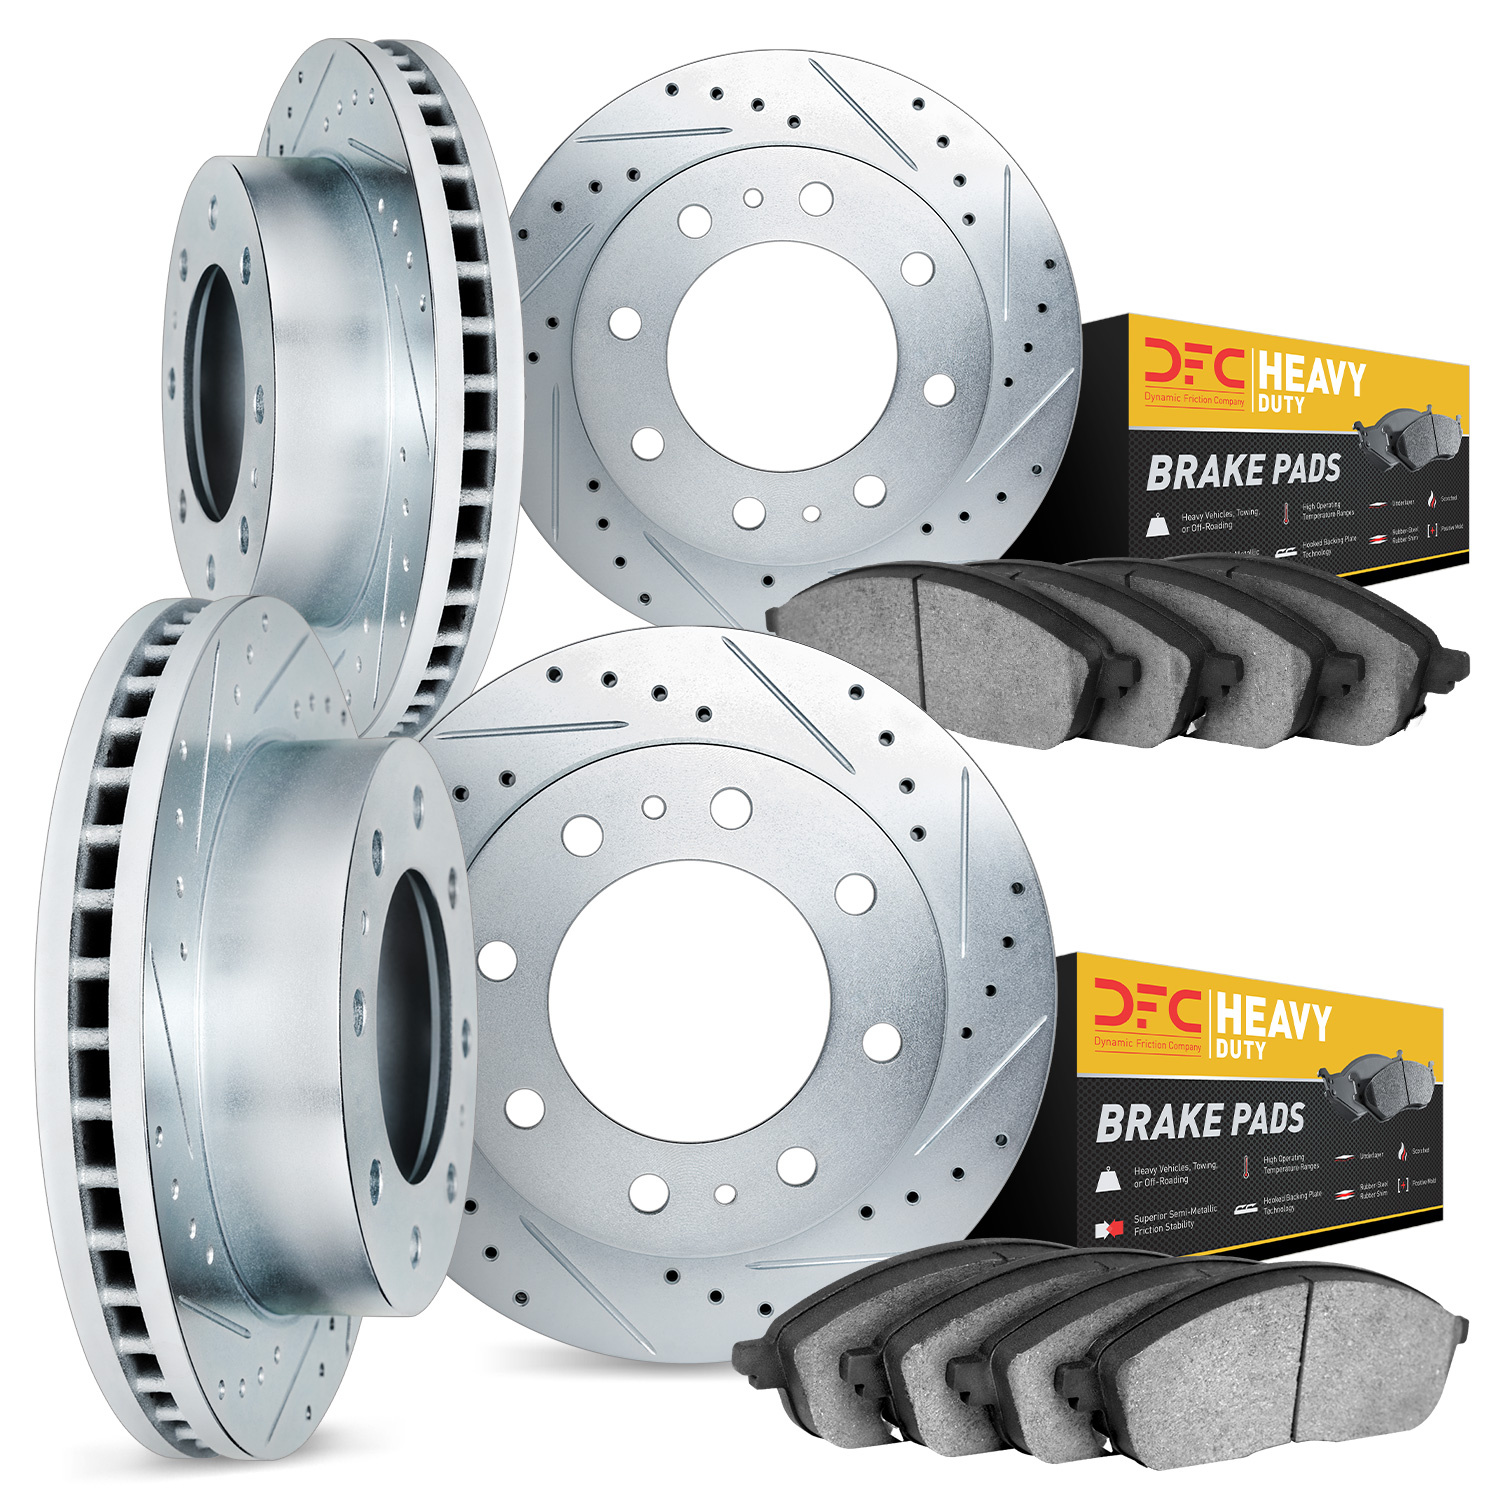 7204-99111 Drilled/Slotted Rotors w/Heavy-Duty Brake Pads Kit [Silver], Fits Select Ford/Lincoln/Mercury/Mazda, Position: Front